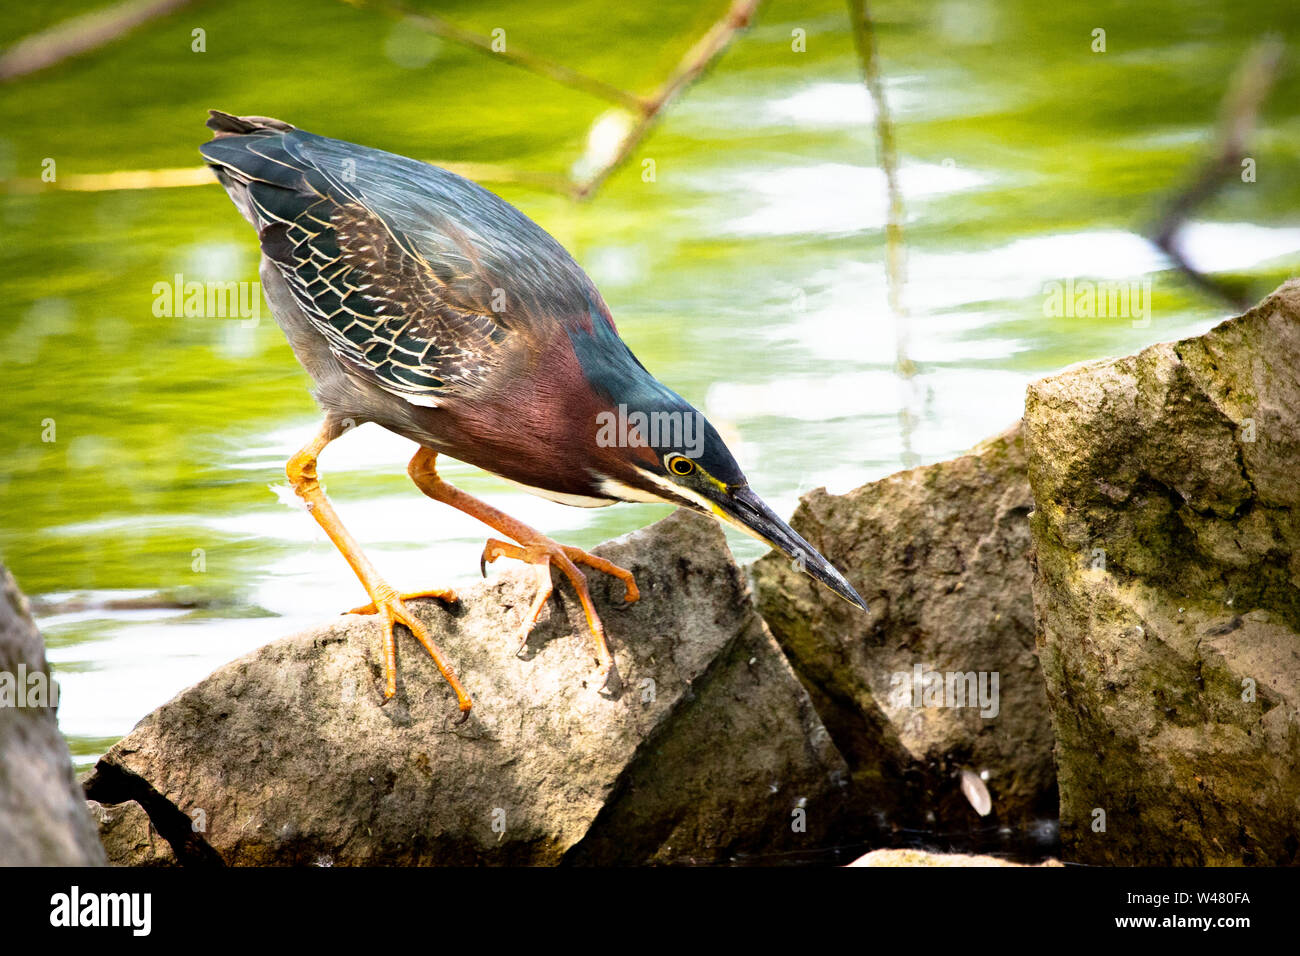 Green Heron Perched on Rocks in Malden Park at Windsor, Ontario Canada Stock Photo